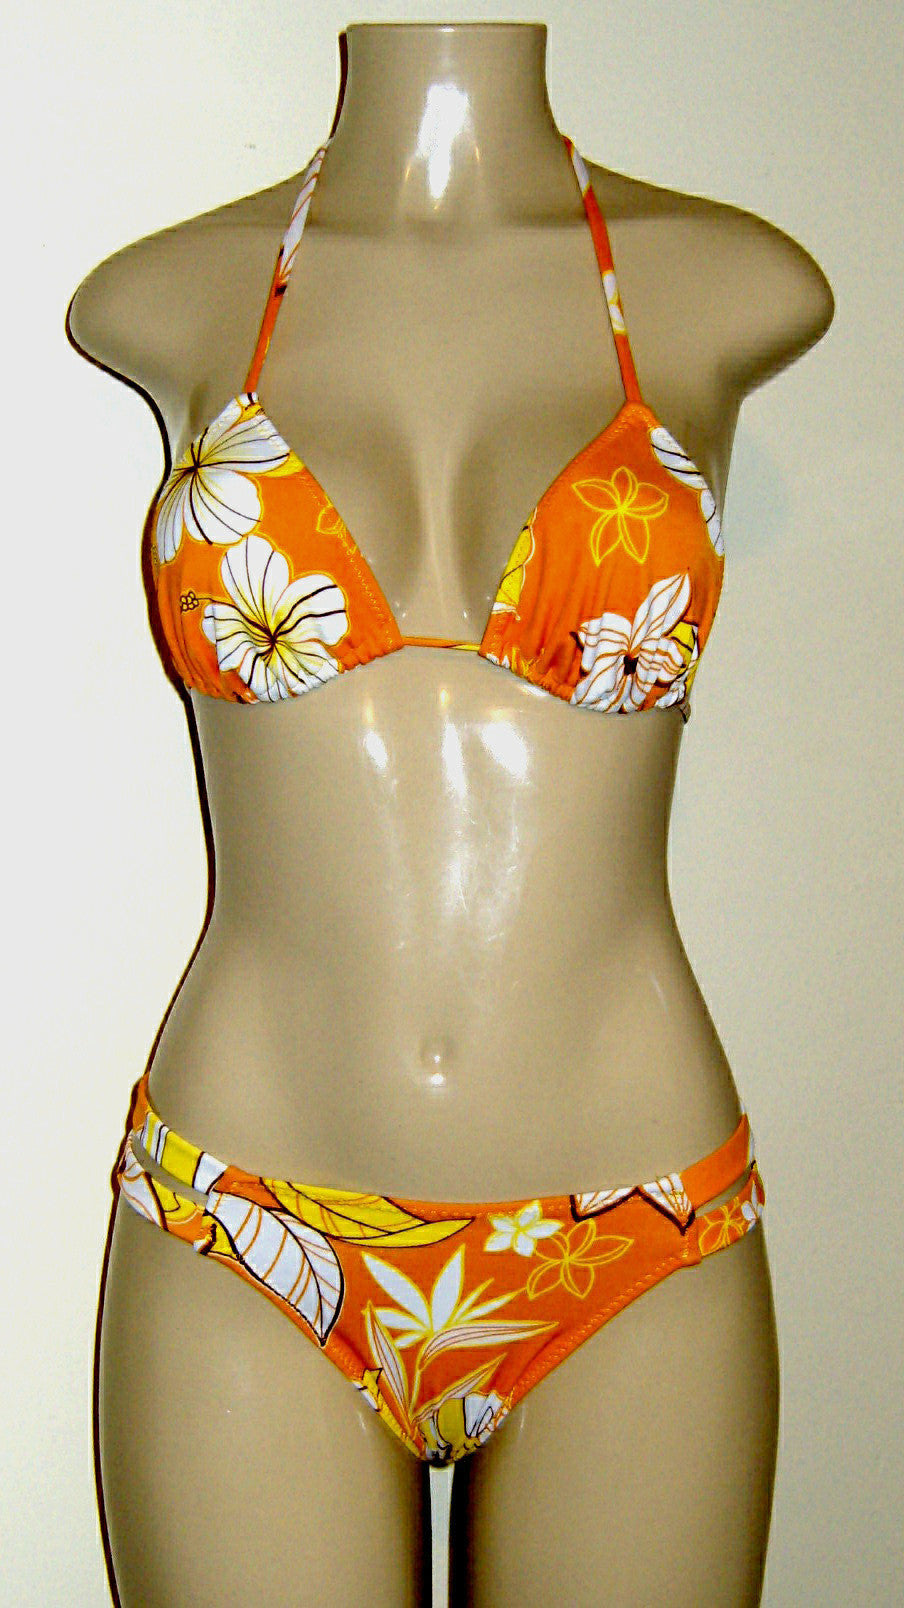 Orange Floral Triangle top and strappy side bottoms on sale. 